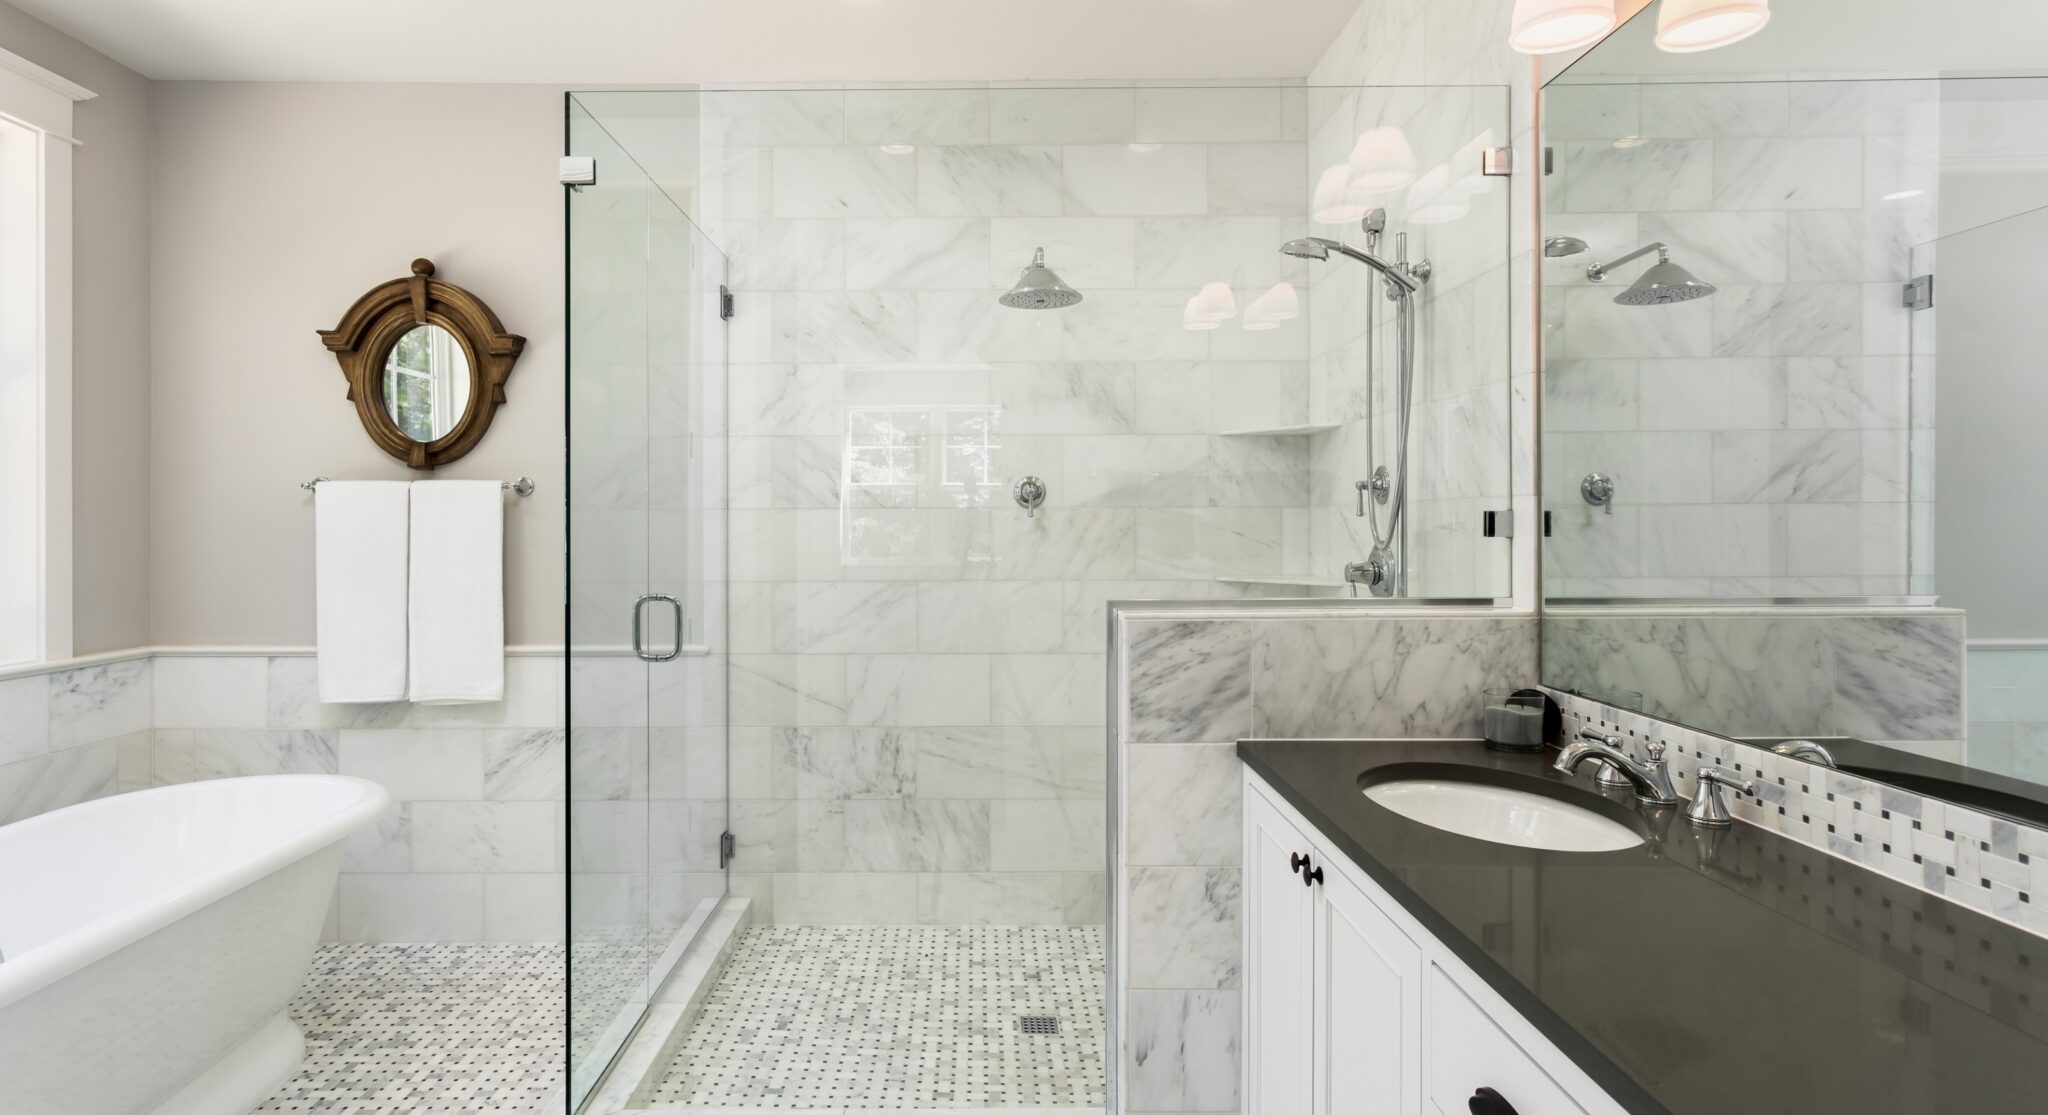 A tiled and marble bathroom with a glass frameless shower screen by Artform Collective.